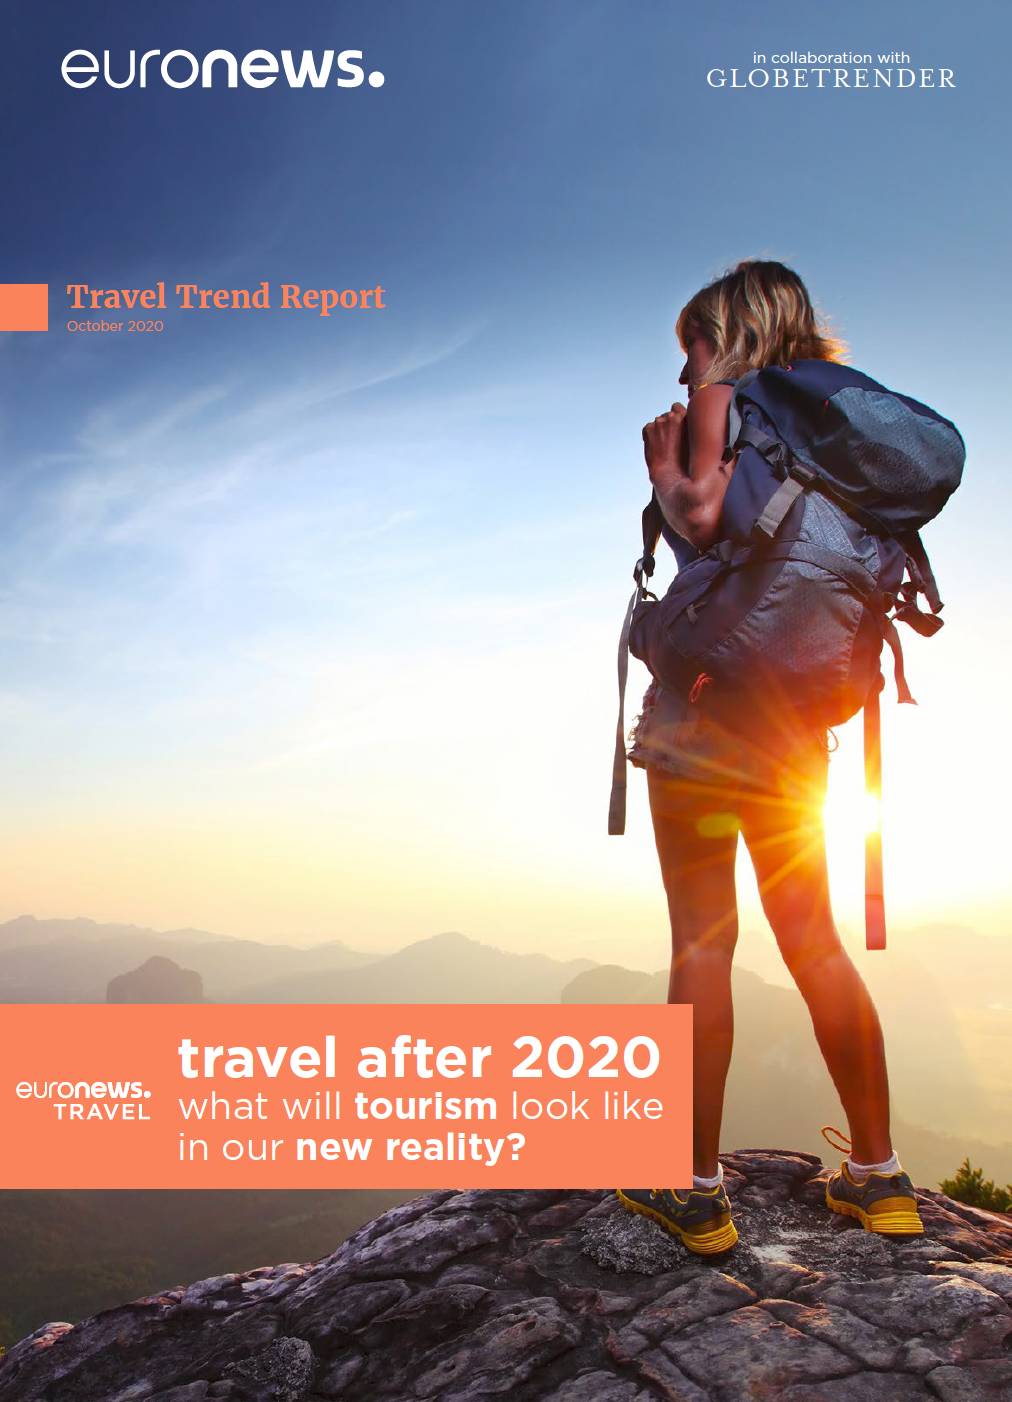 Travel after 2020, What will tourism look like in our new reality?